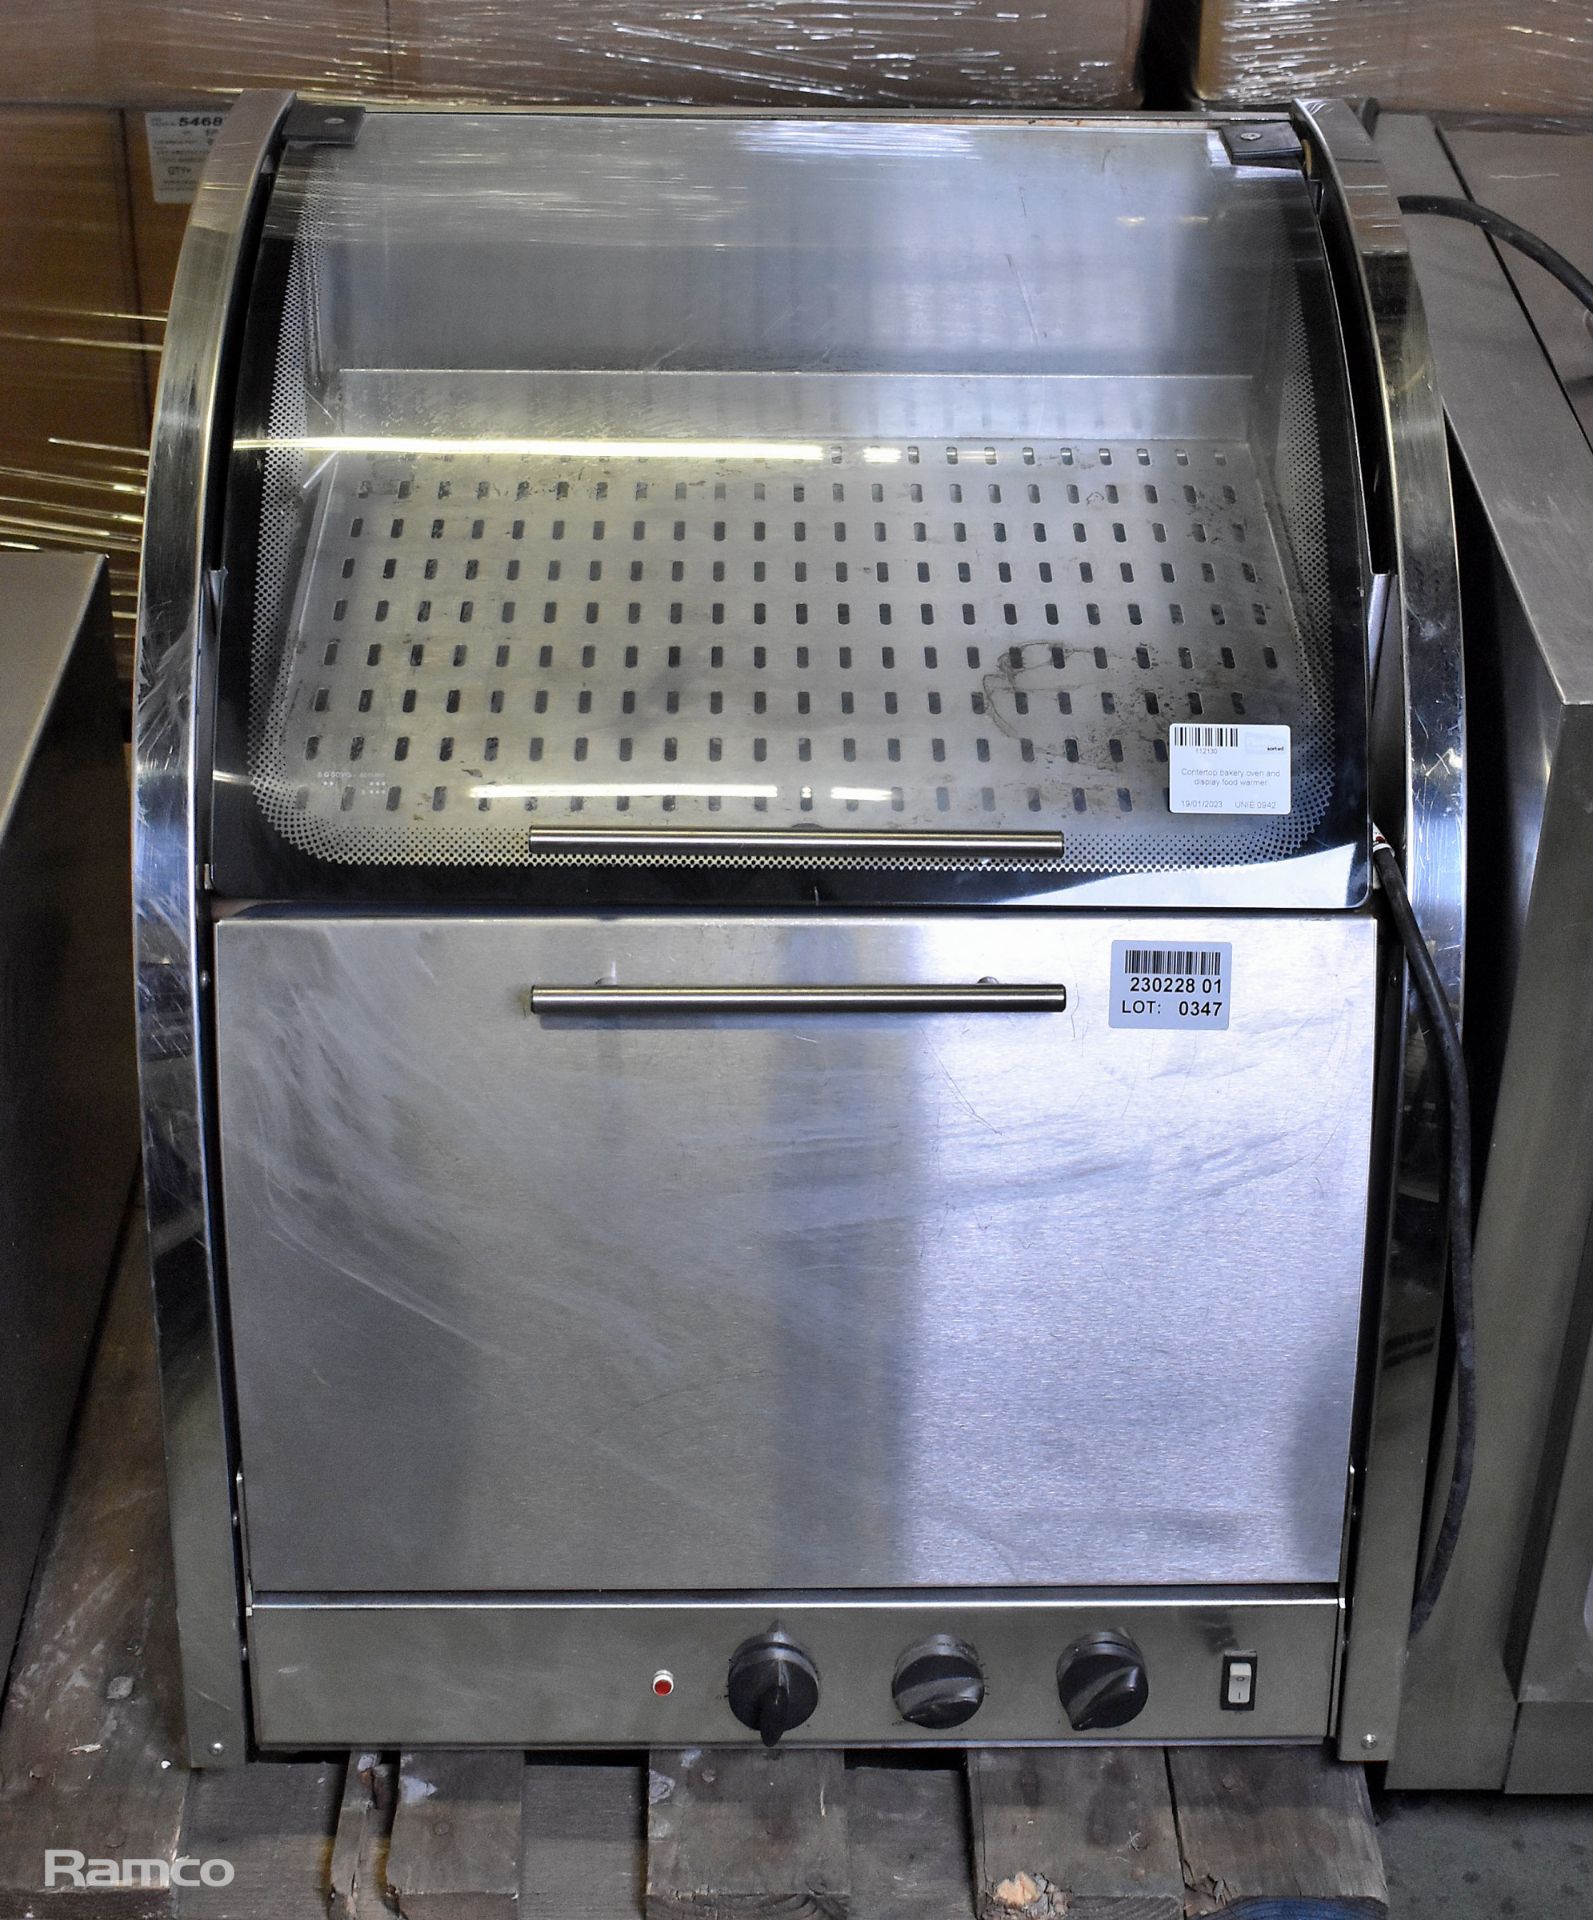 Countertop bakery oven and display food warmer